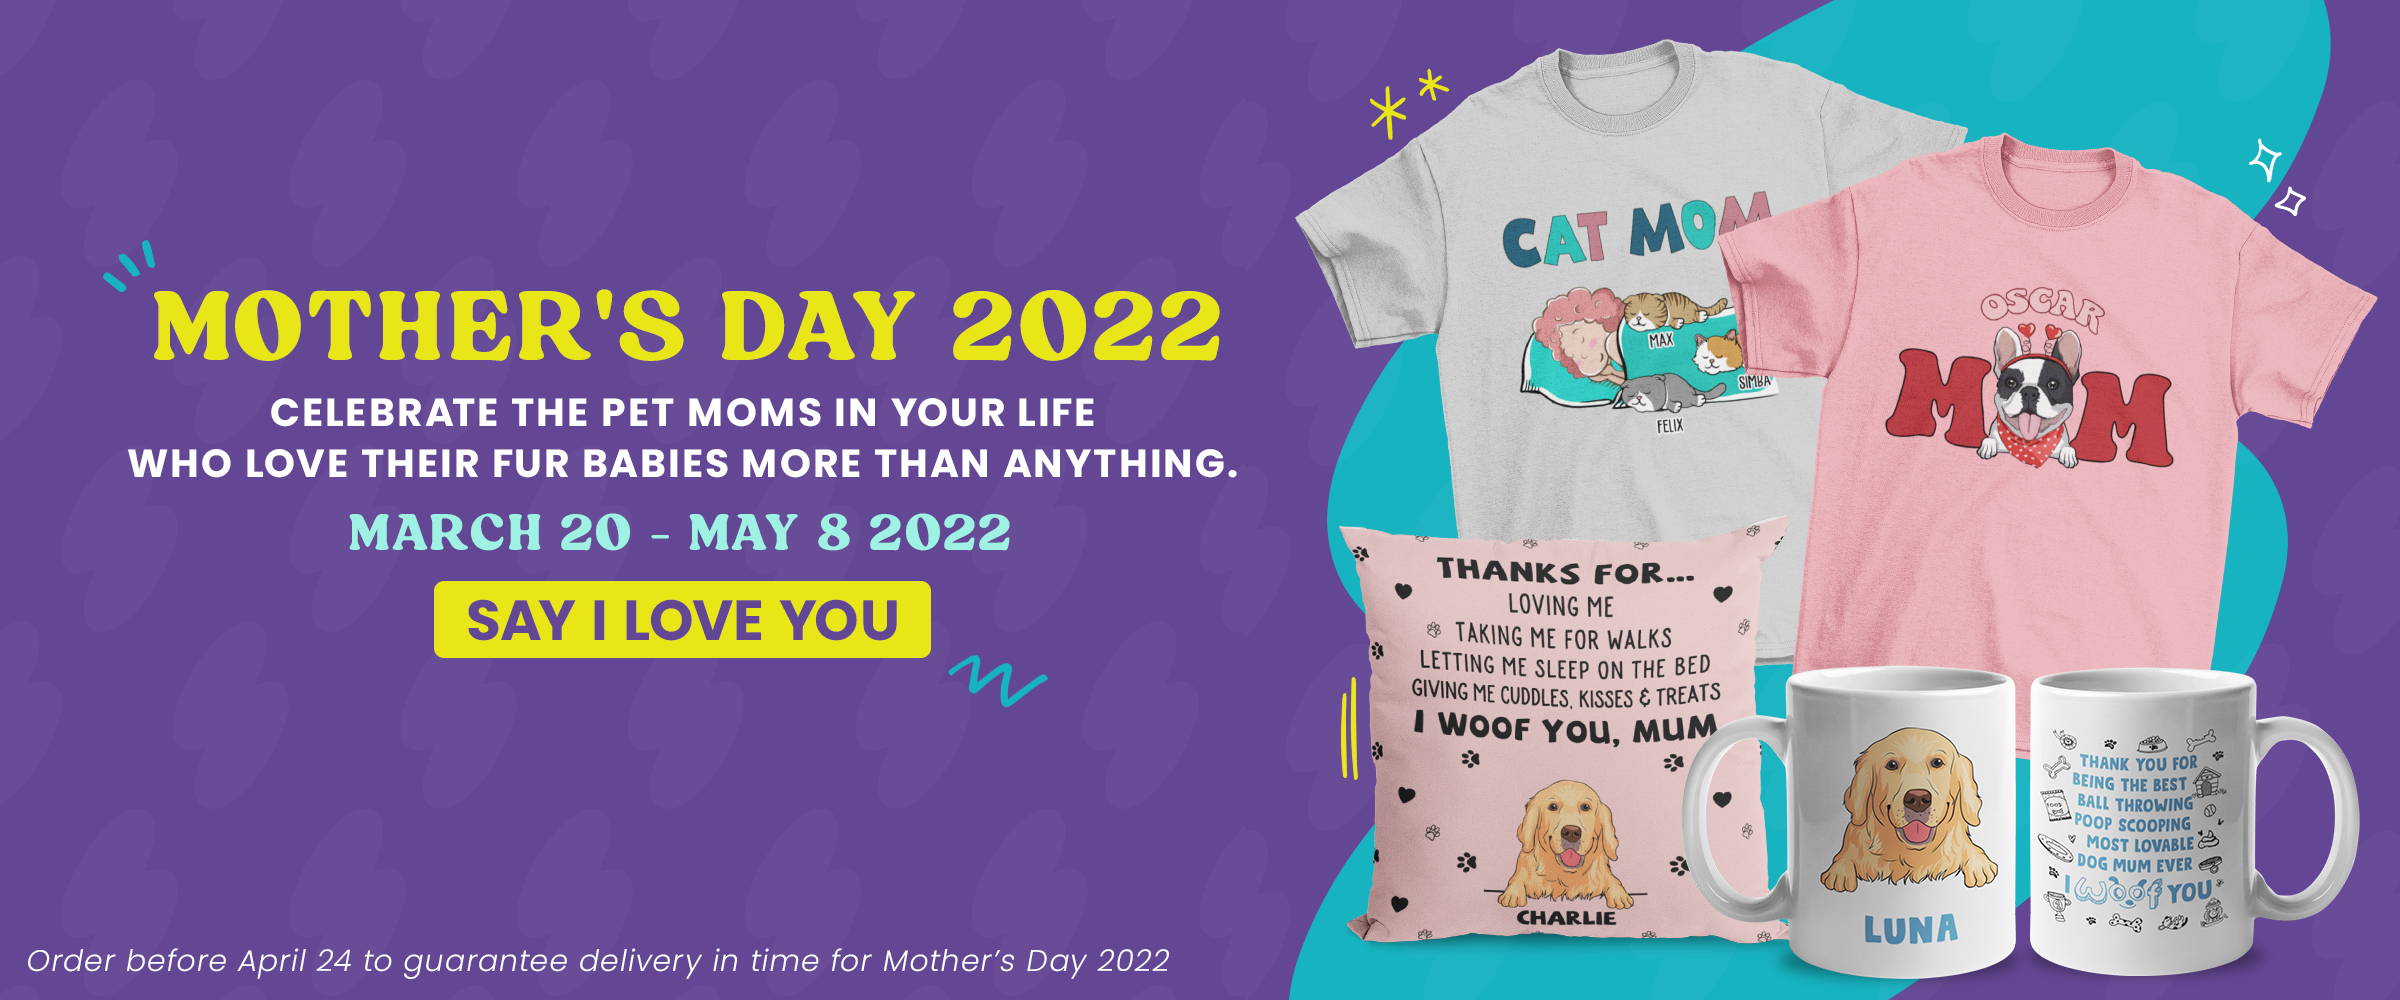 MOTHER'S DAY GIFTS FOR PET MOMS